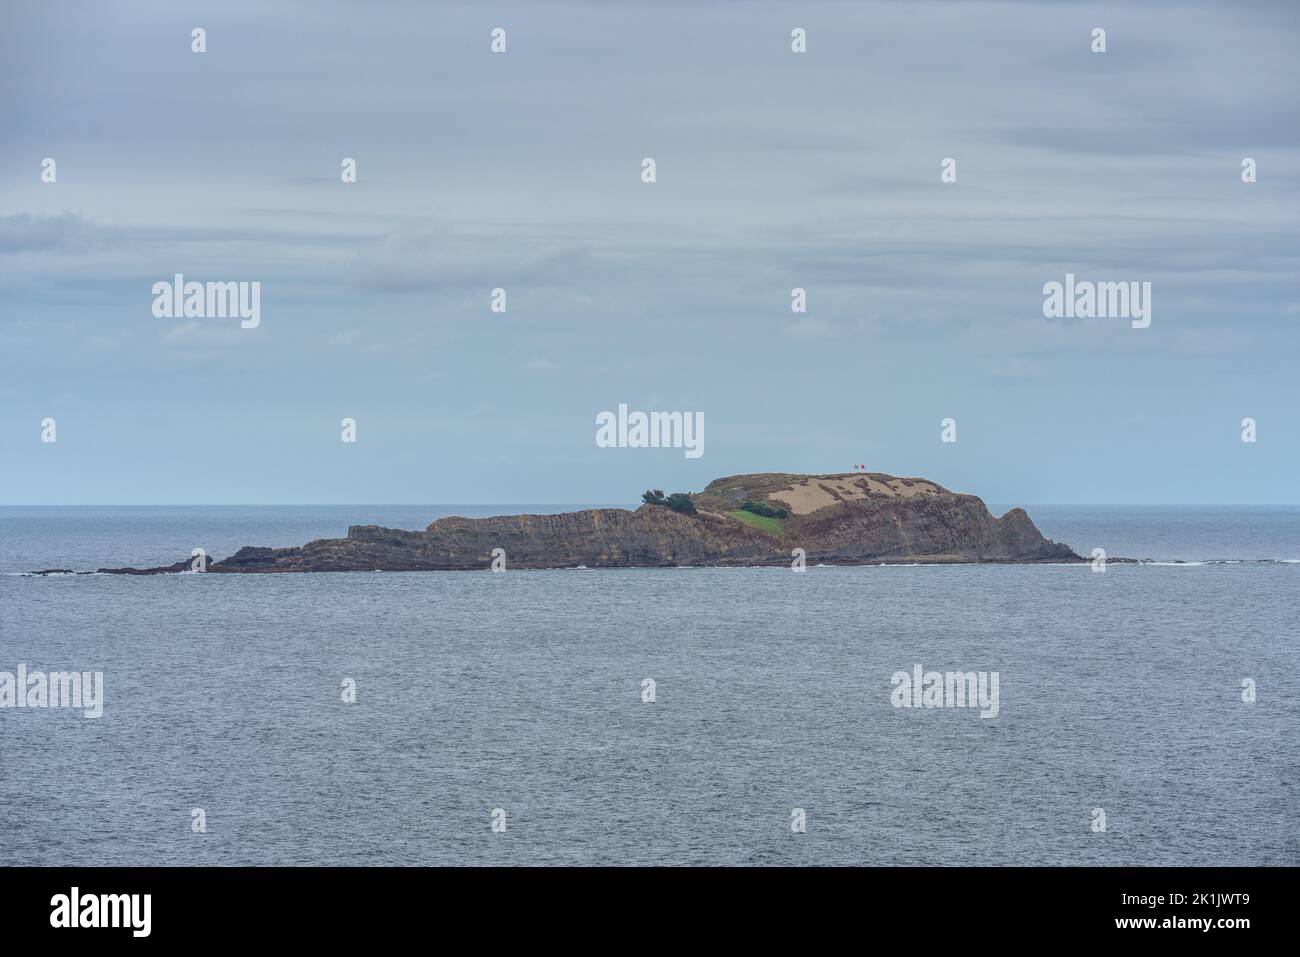 View of a remote island on the sea Stock Photo